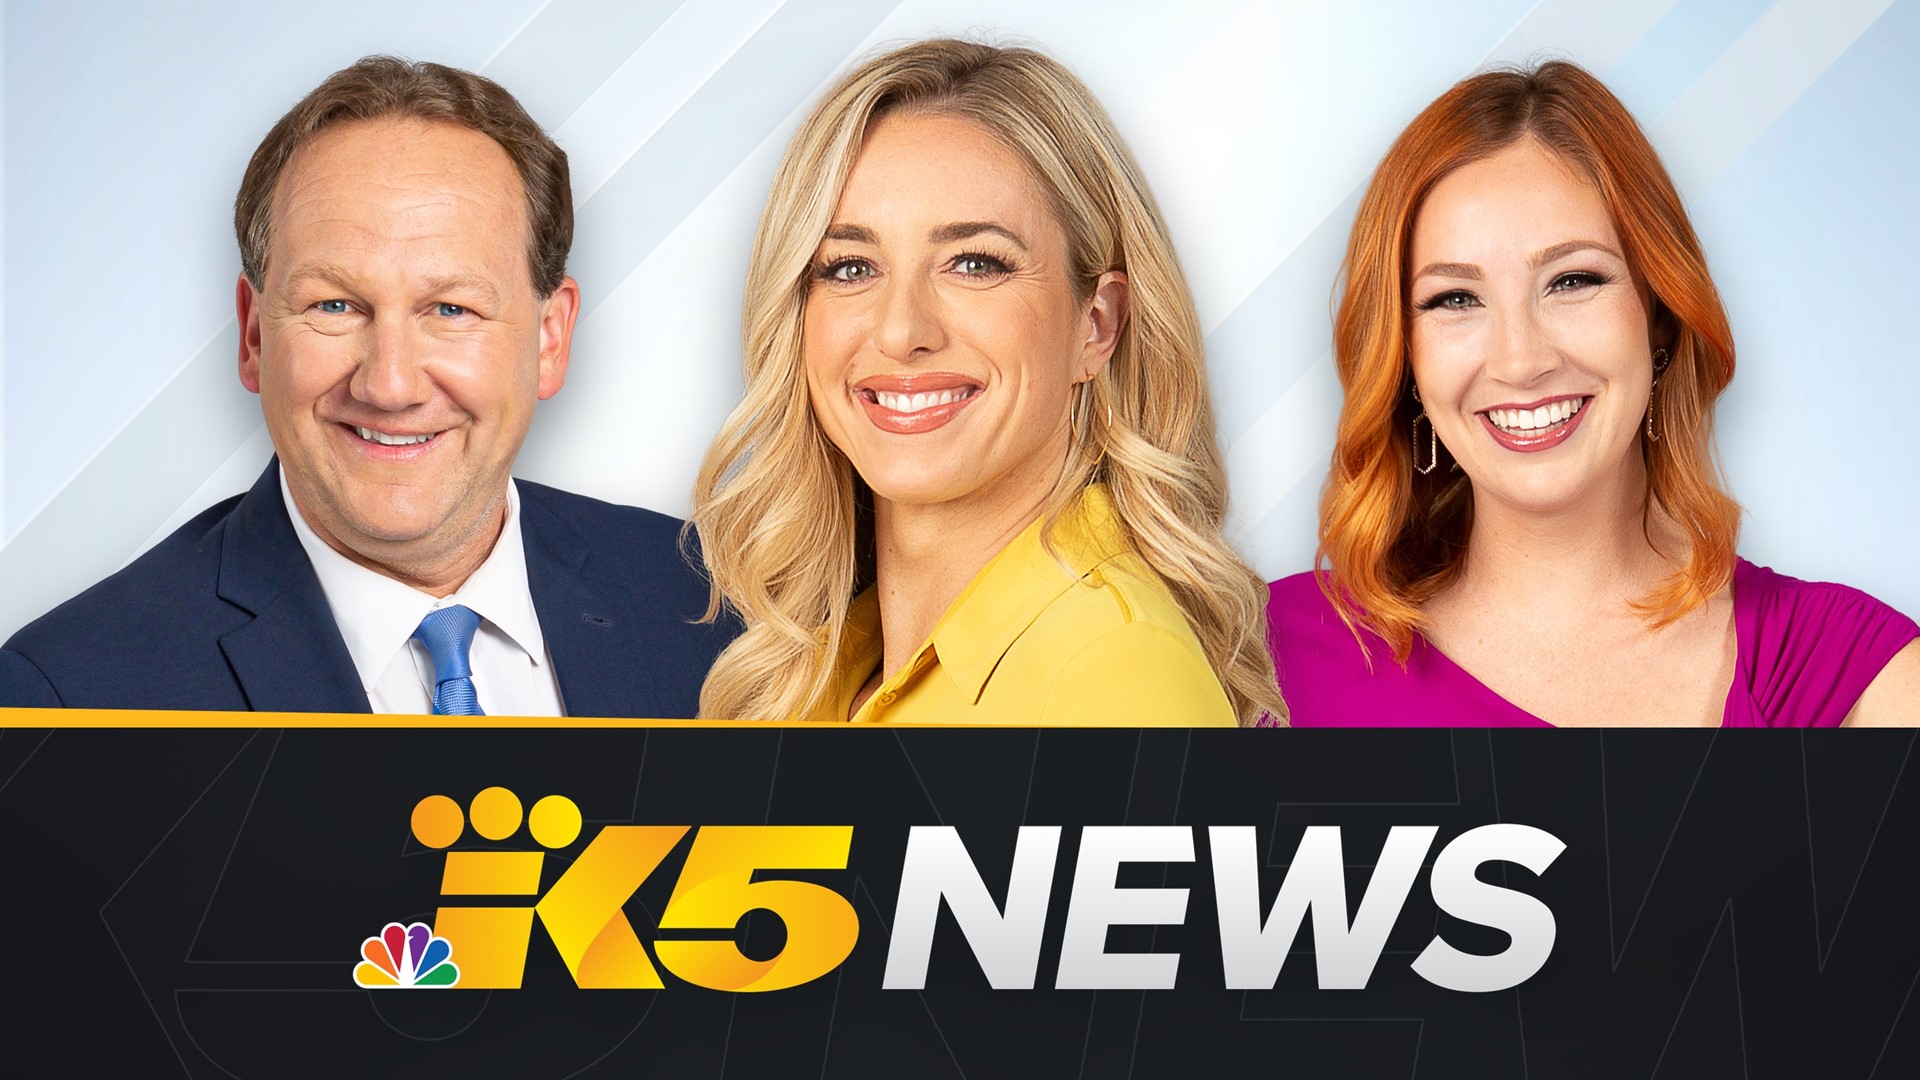 The KING 5 News Team provides the latest on the major news events of the day impacting western Washington along with the latest weather, traffic and sports updates.